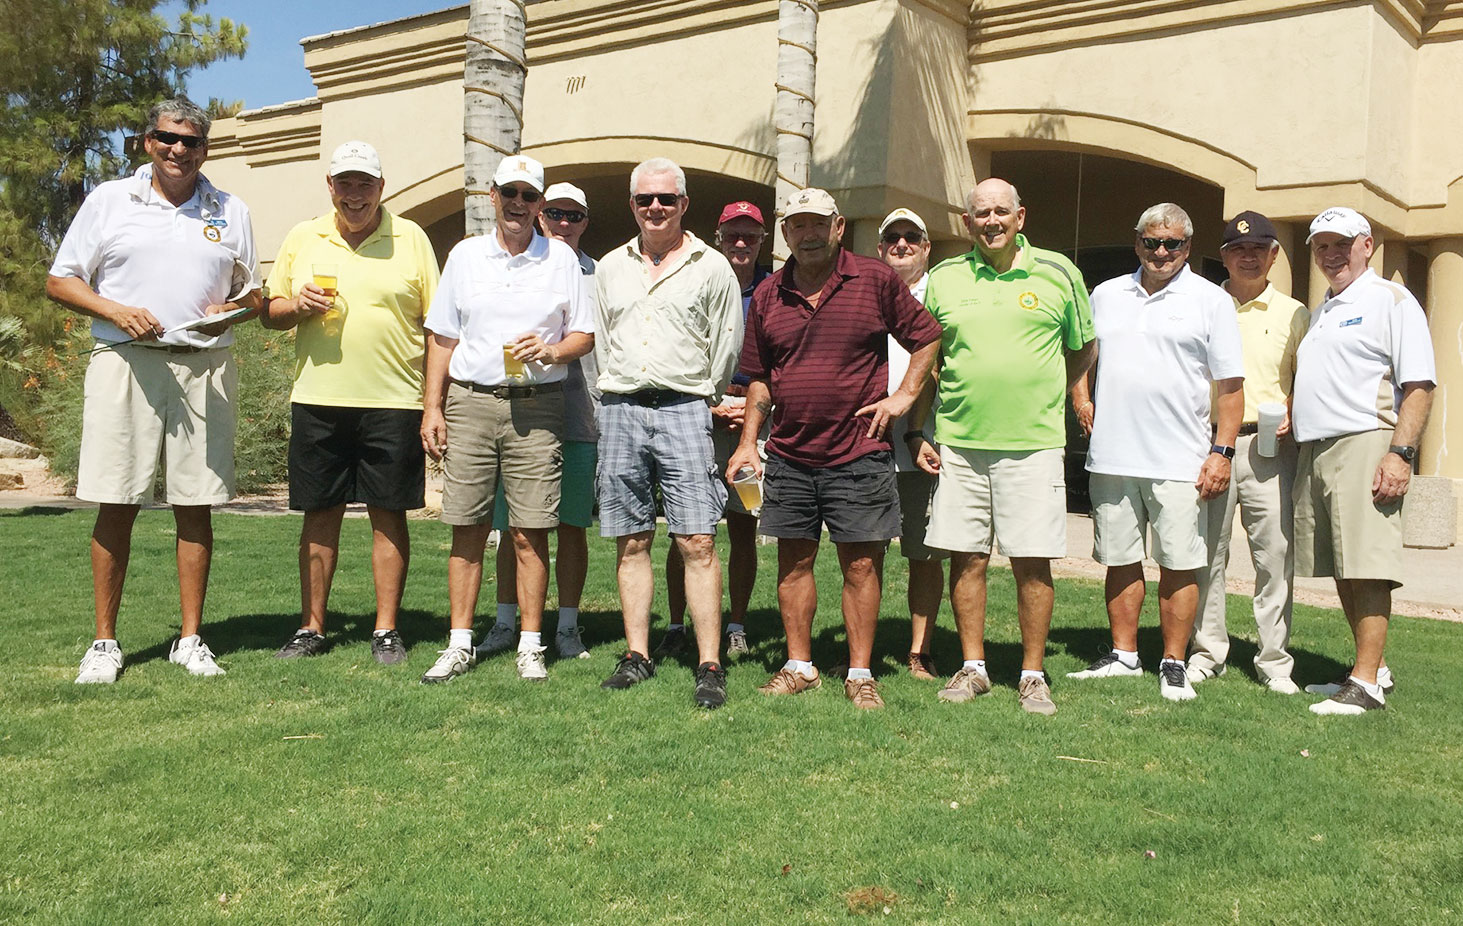 Left to Right: Mike D’Onofrio, Don Drummond, Don Burrows, Kerl Wisser, Bjorne Kaer, Greg McKenzie, Joey Romero, Dick Ruder, Dave Eckert, John Santalucia, Kent Chi and Bob Mantucca; not pictured: Dick Heidesch and Keith Charlesworth